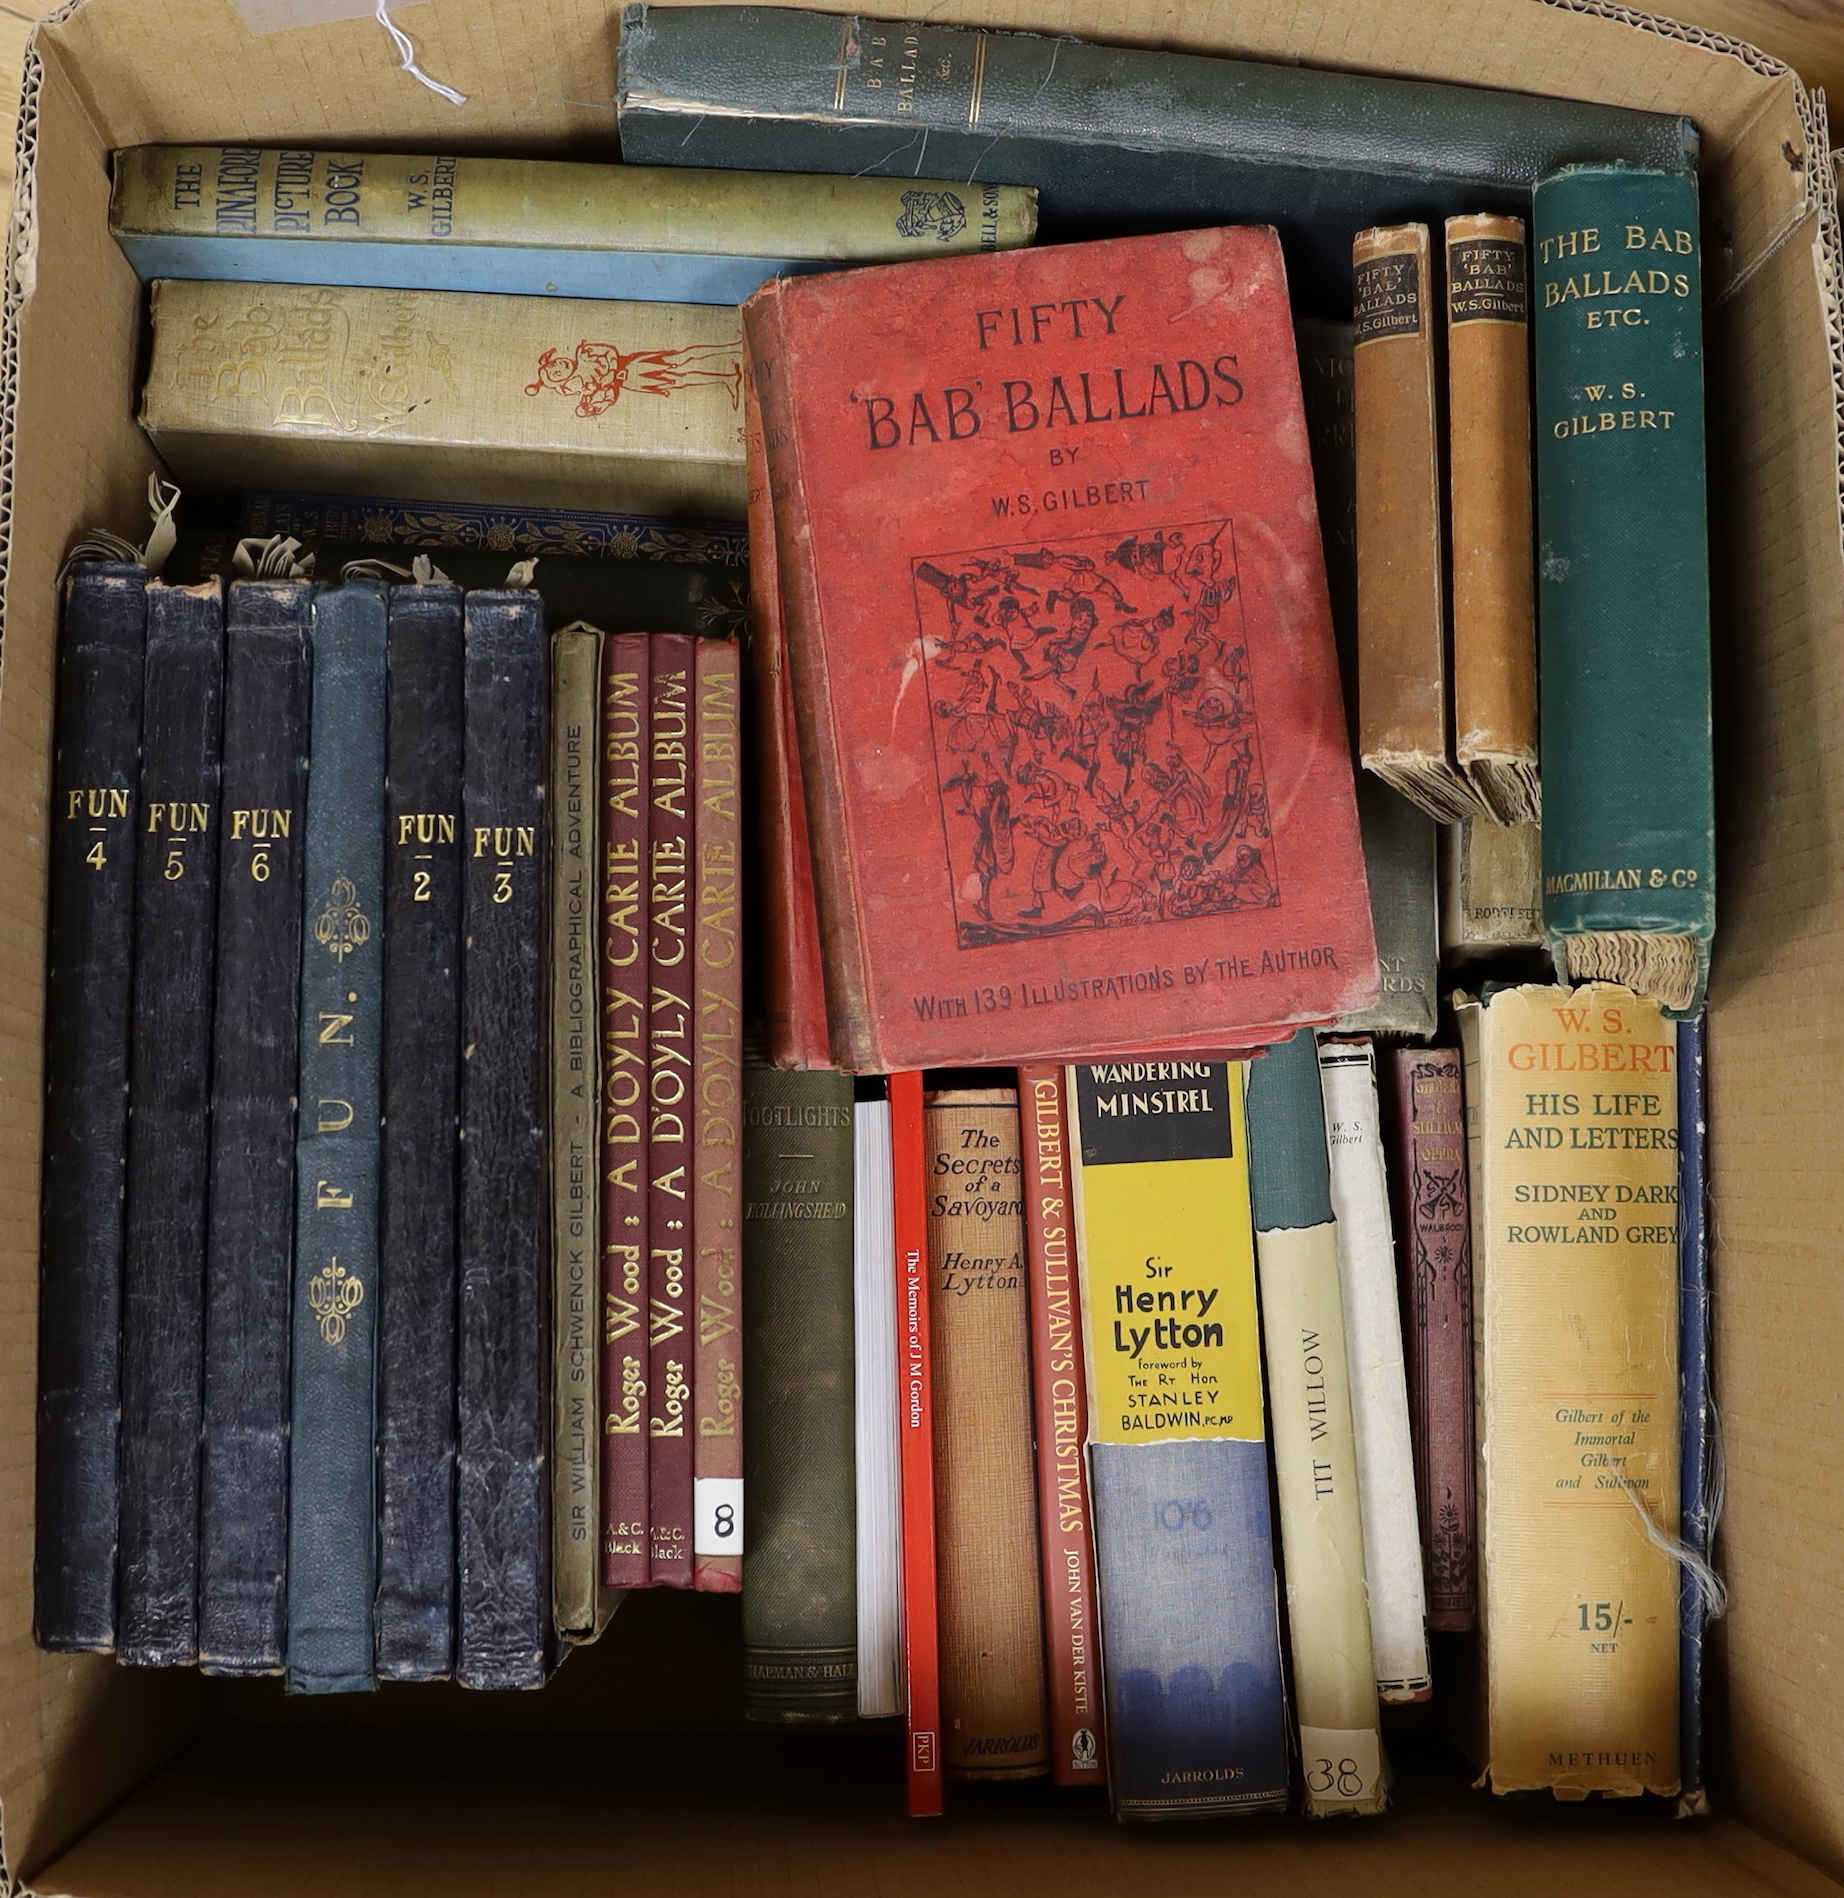 A collection of Gilbert and Sullivan related books and memorabilia including; scores for many of the operettas, biographies and histories relating to D’Oyly Carte, including ten books signed by the authors or cast member